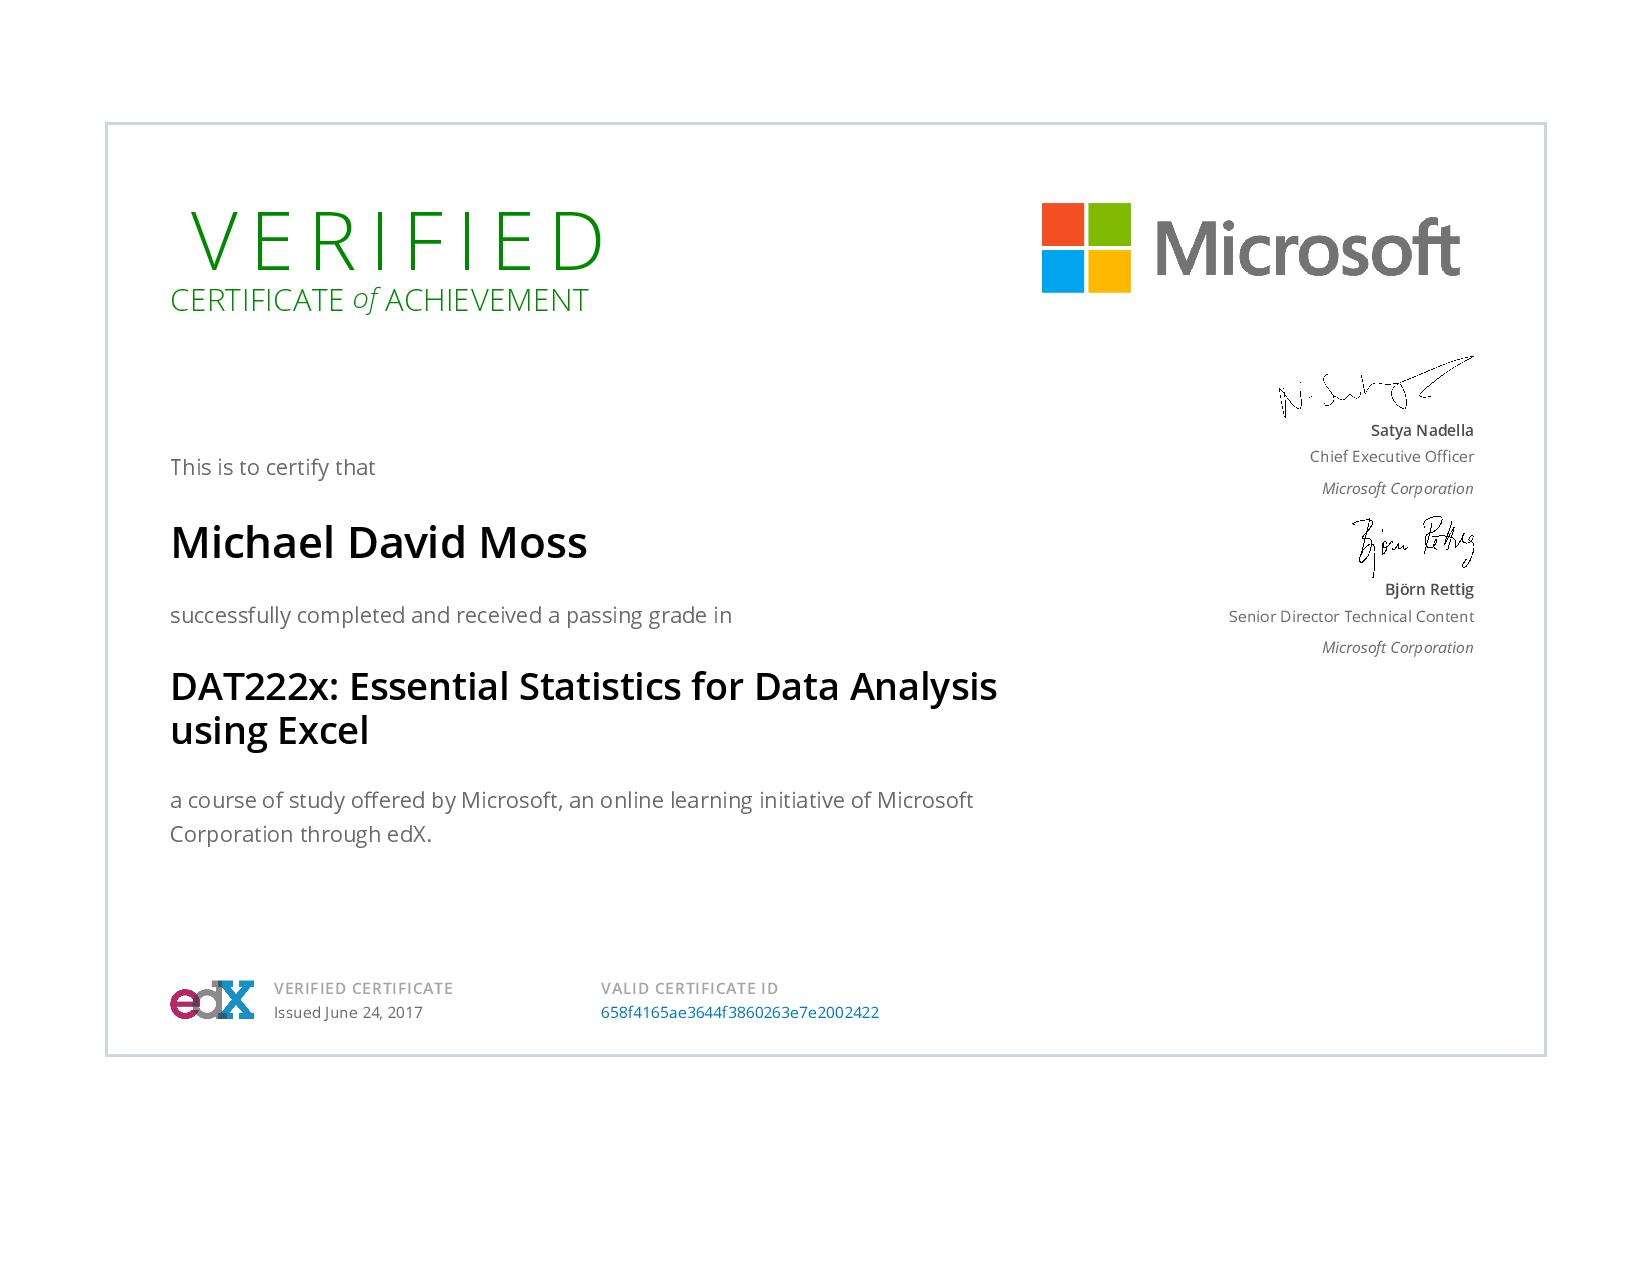 Essential Statistics for Data Analysis using Excel Certificate